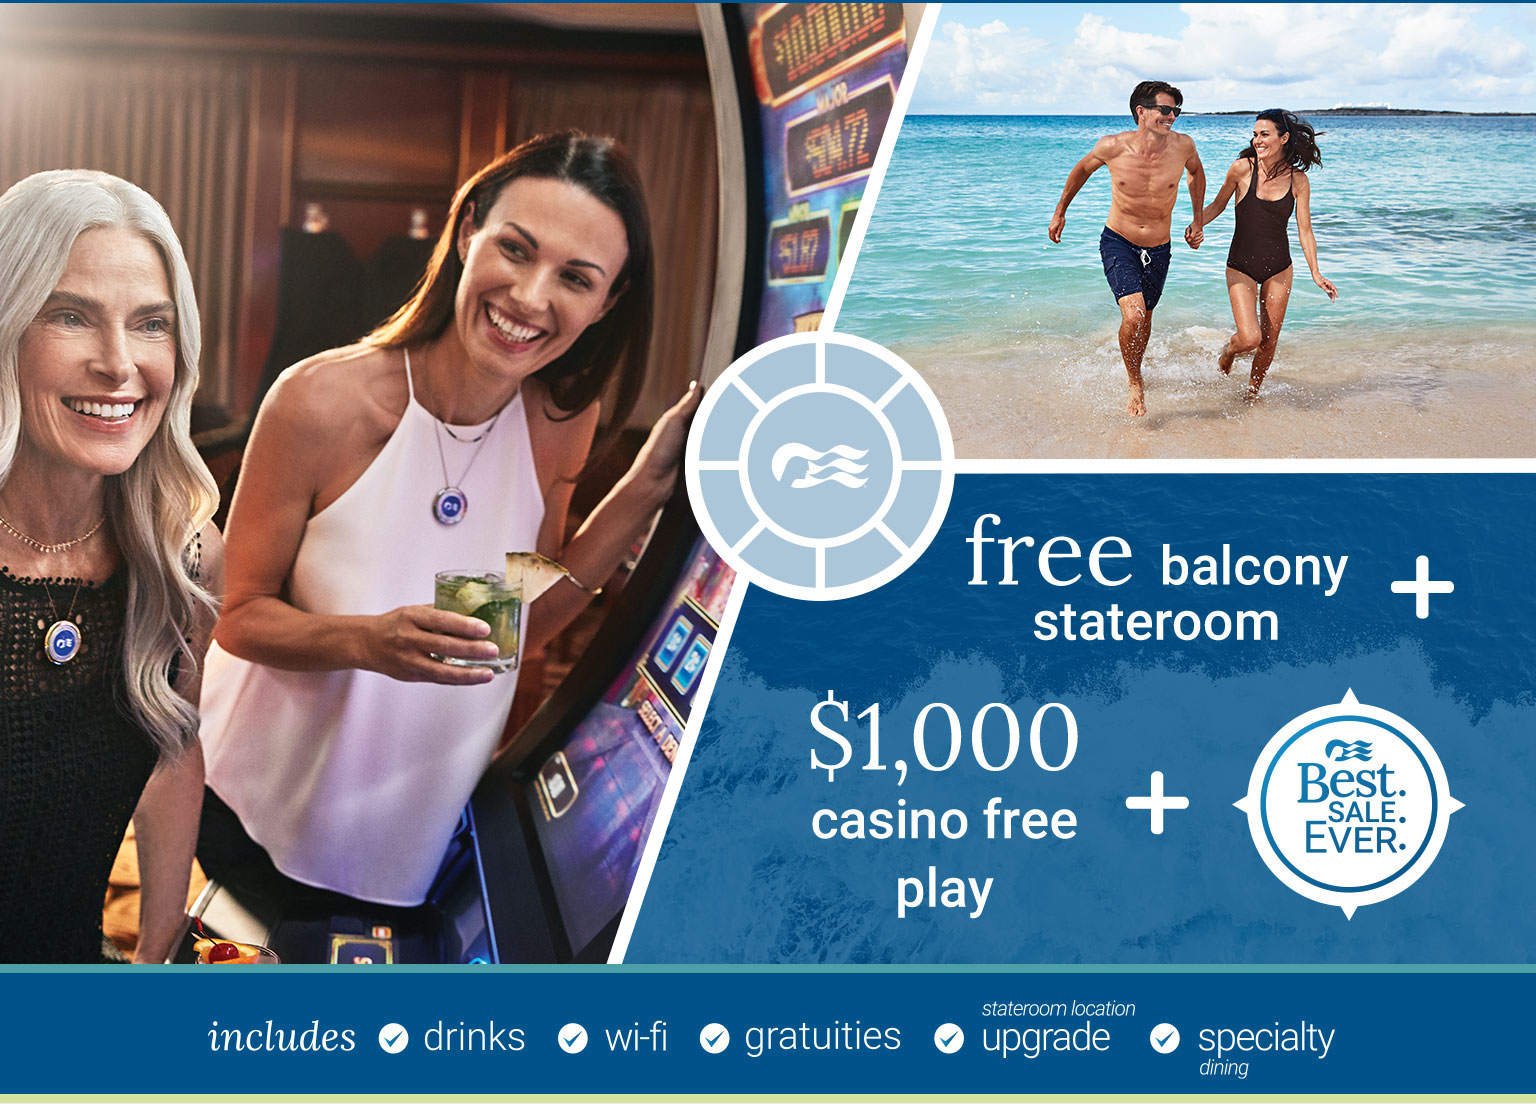 Collage of two women playing at a slot machine, a couple running on the beach, and the special Casino offer